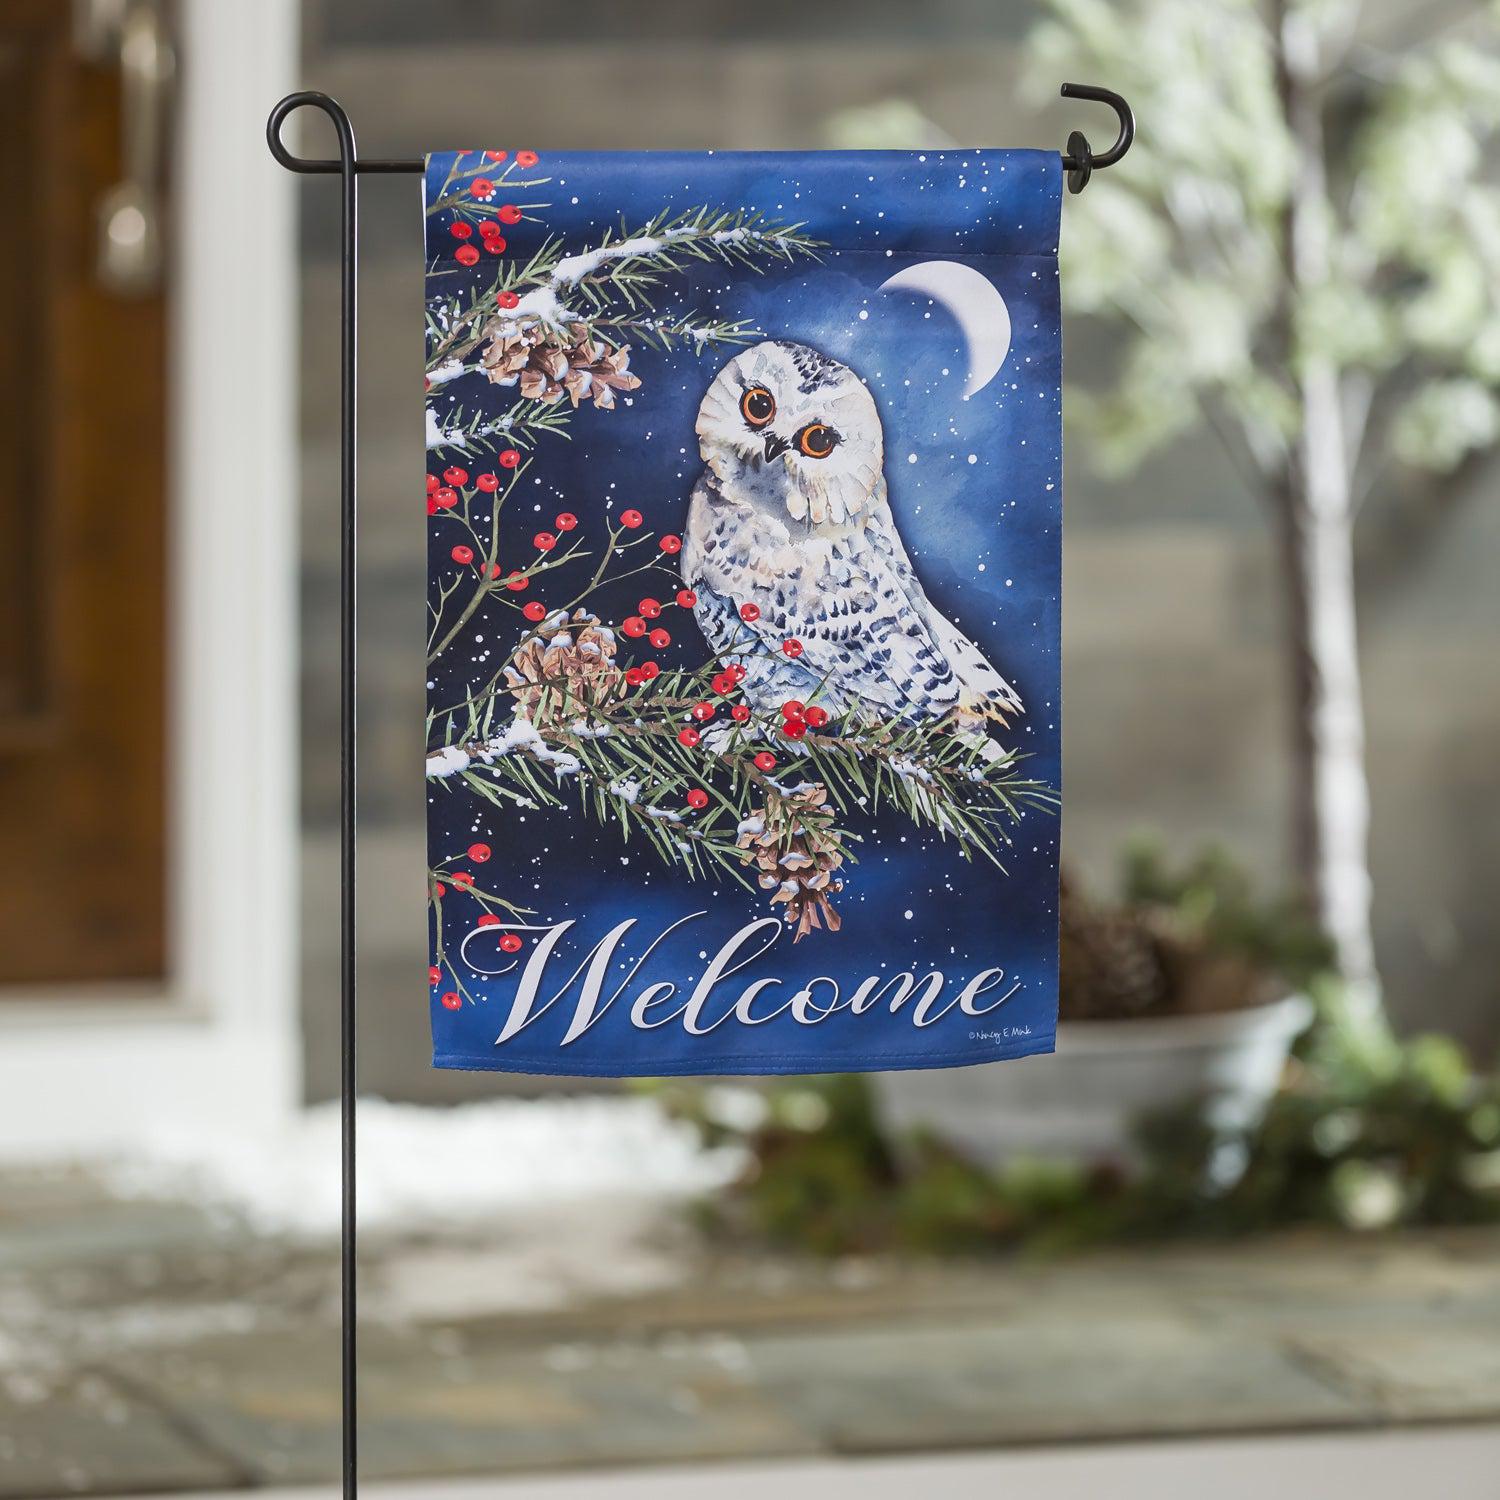 The Owl's Winter Greeting garden flag features a snowy owl at night resting on a pine branch along with the word "Welcome". 